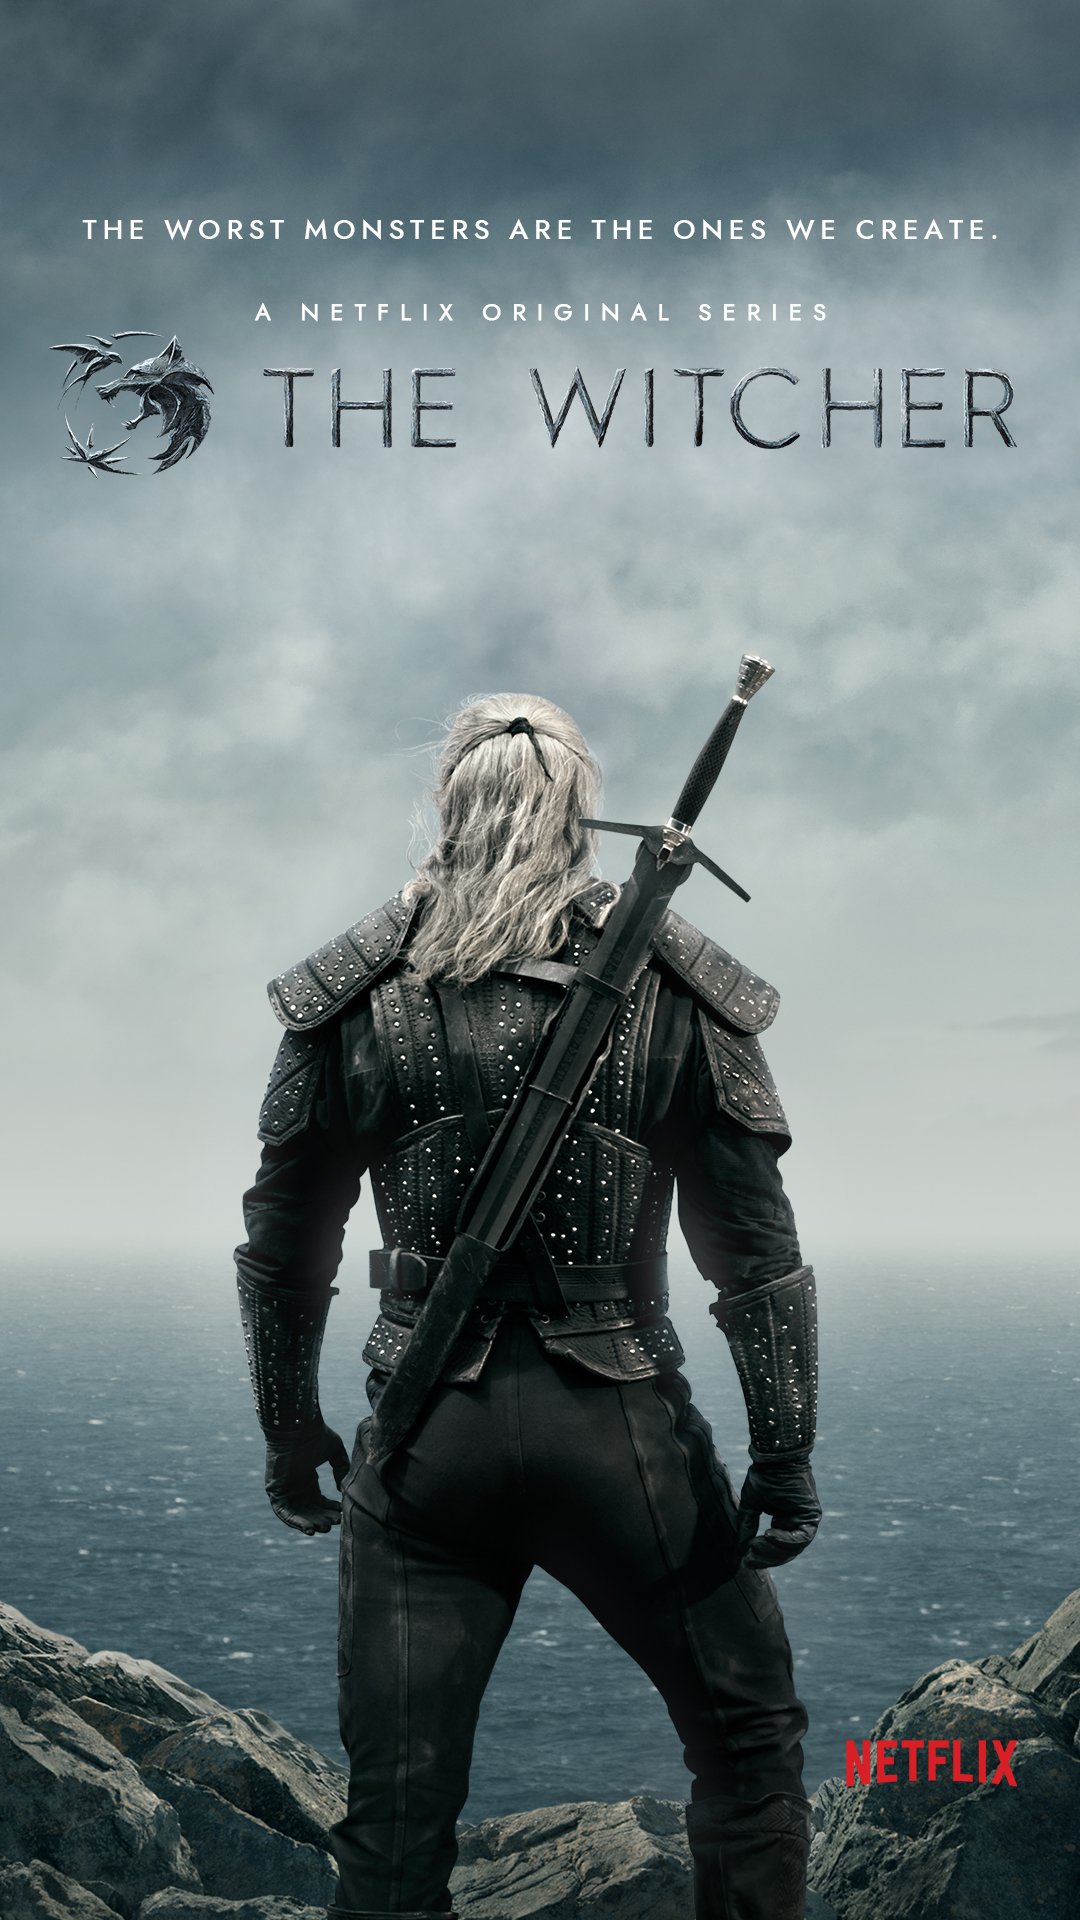 The Witcher S2: Filling out the Continent